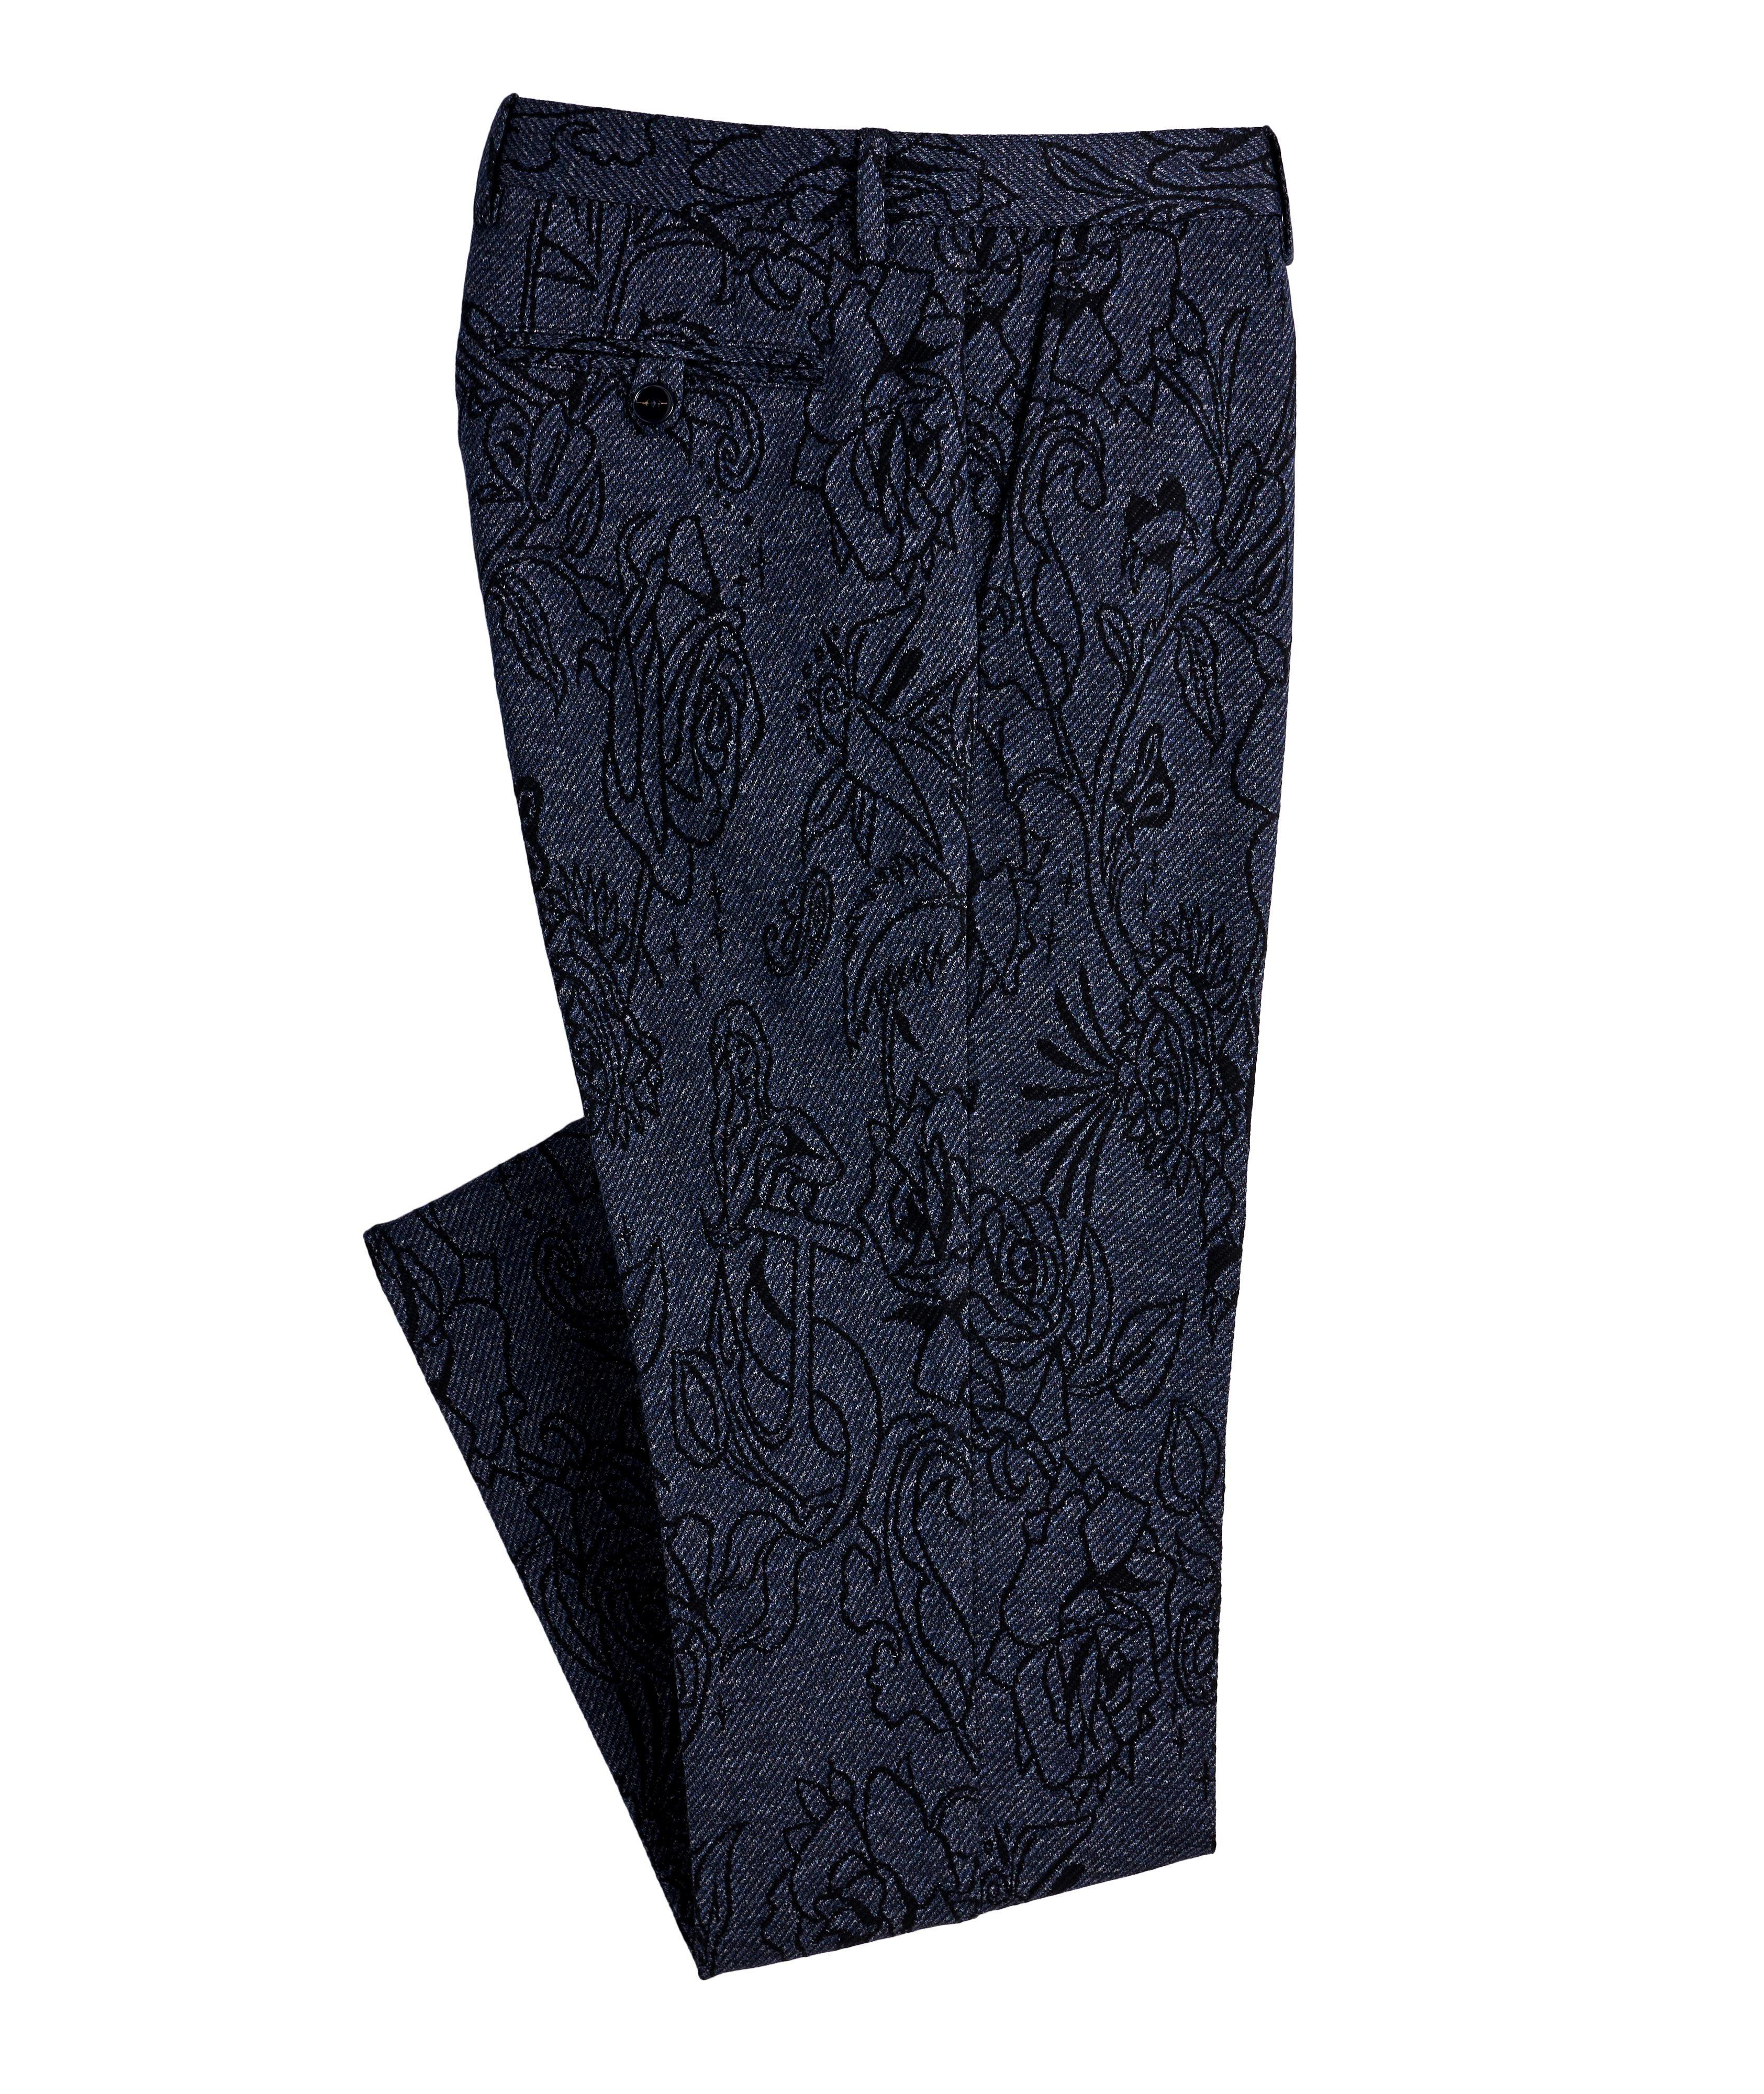 Paisley Print Twill Cotton Trousers image 0